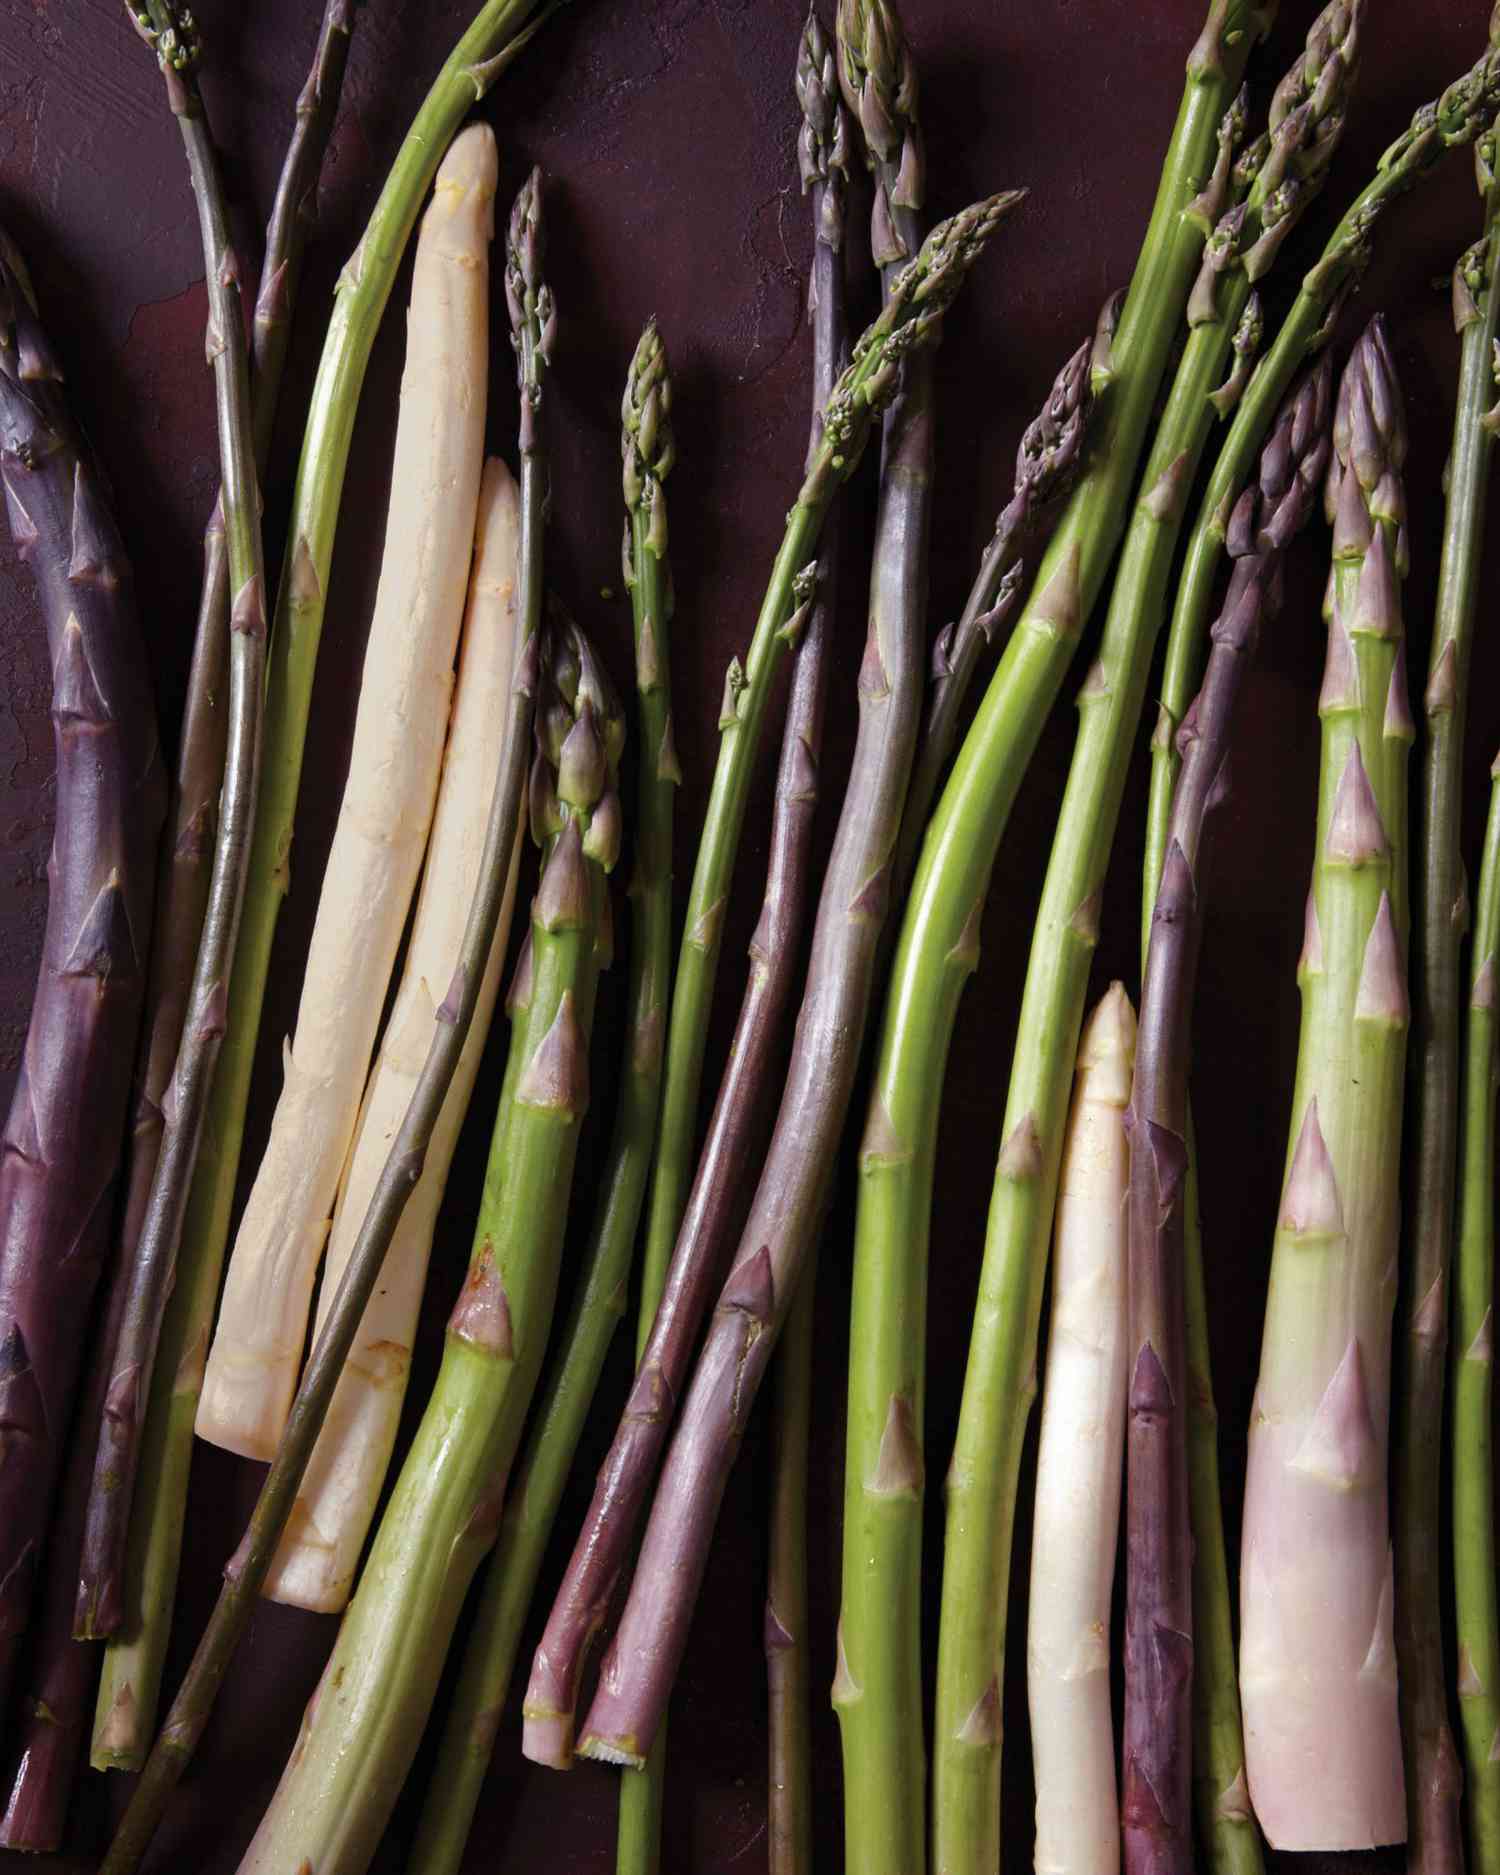 green, white, and purple asparagus